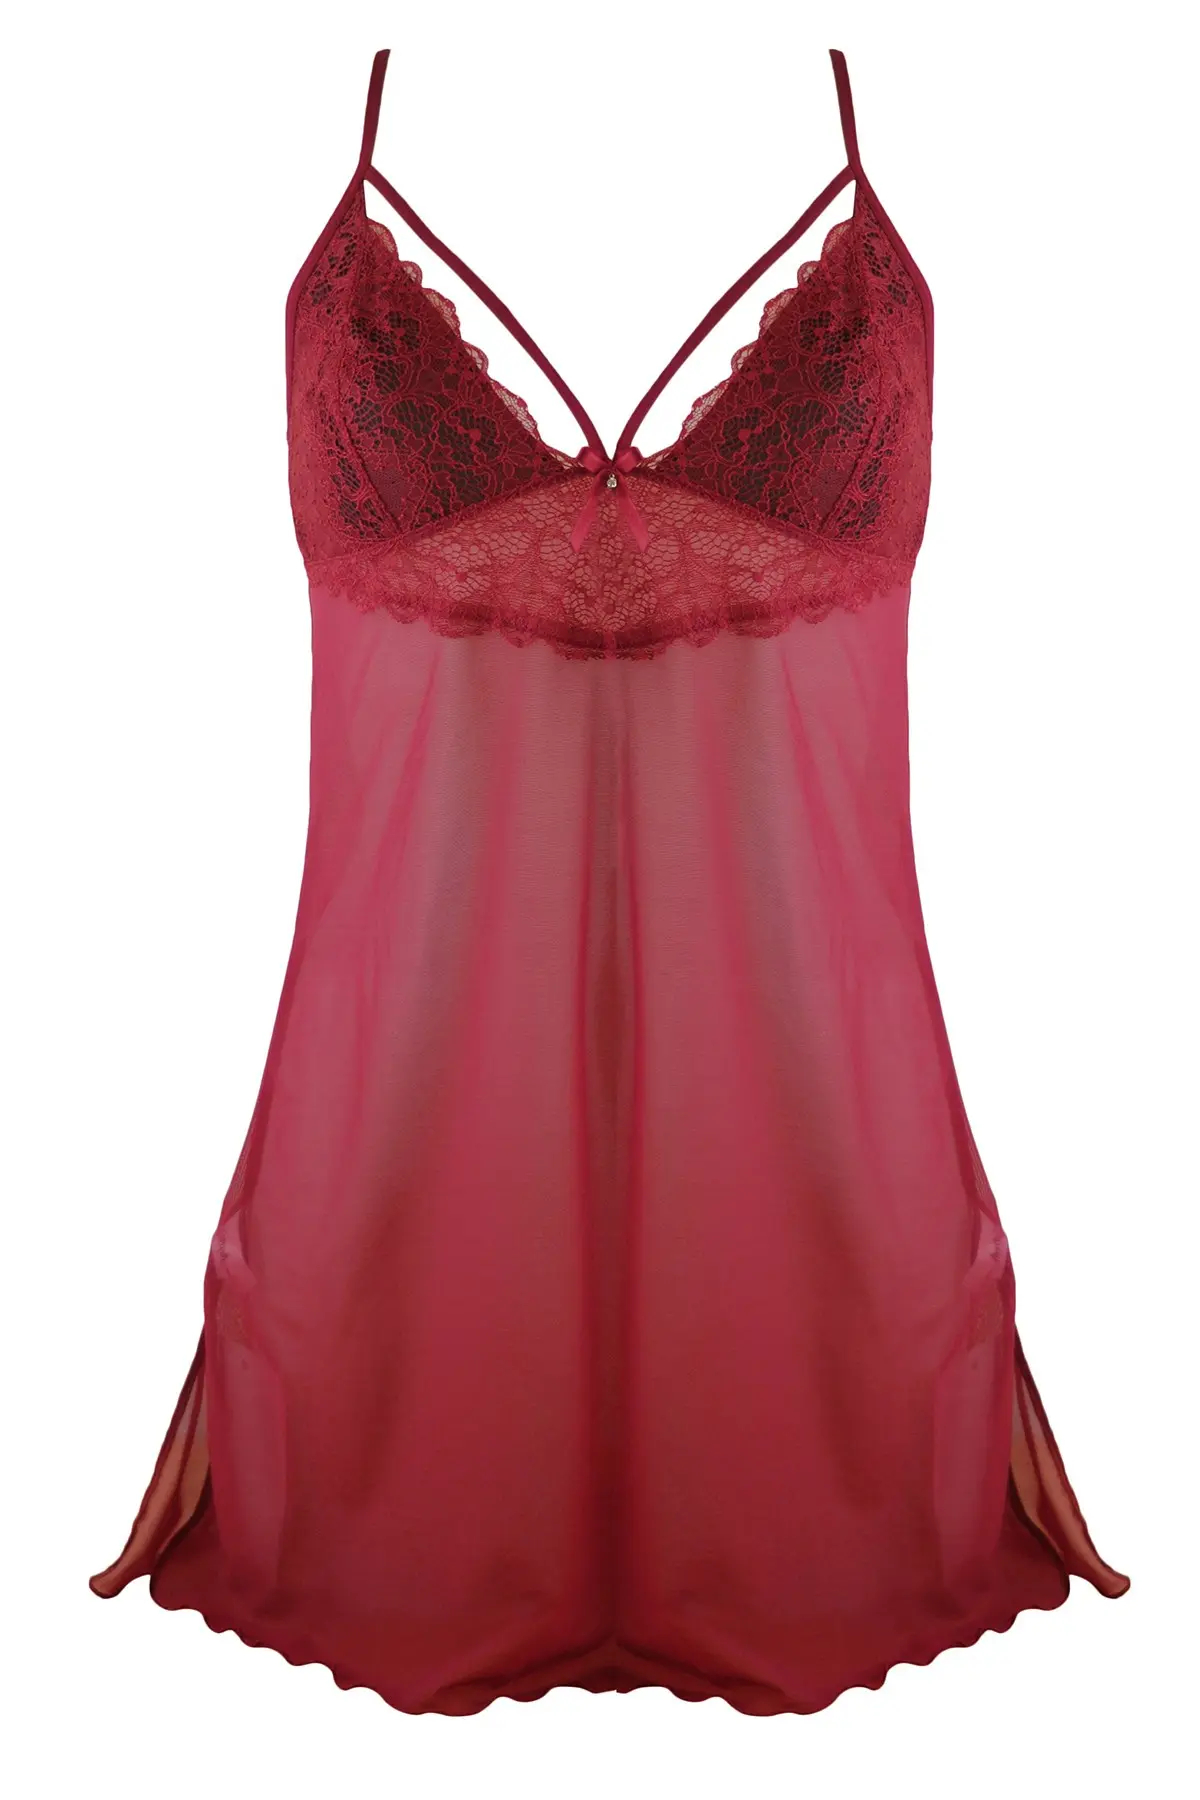 Obsession Chemise | Pour Moi | Obsession Chemise | Ruby Red | Pour Moi